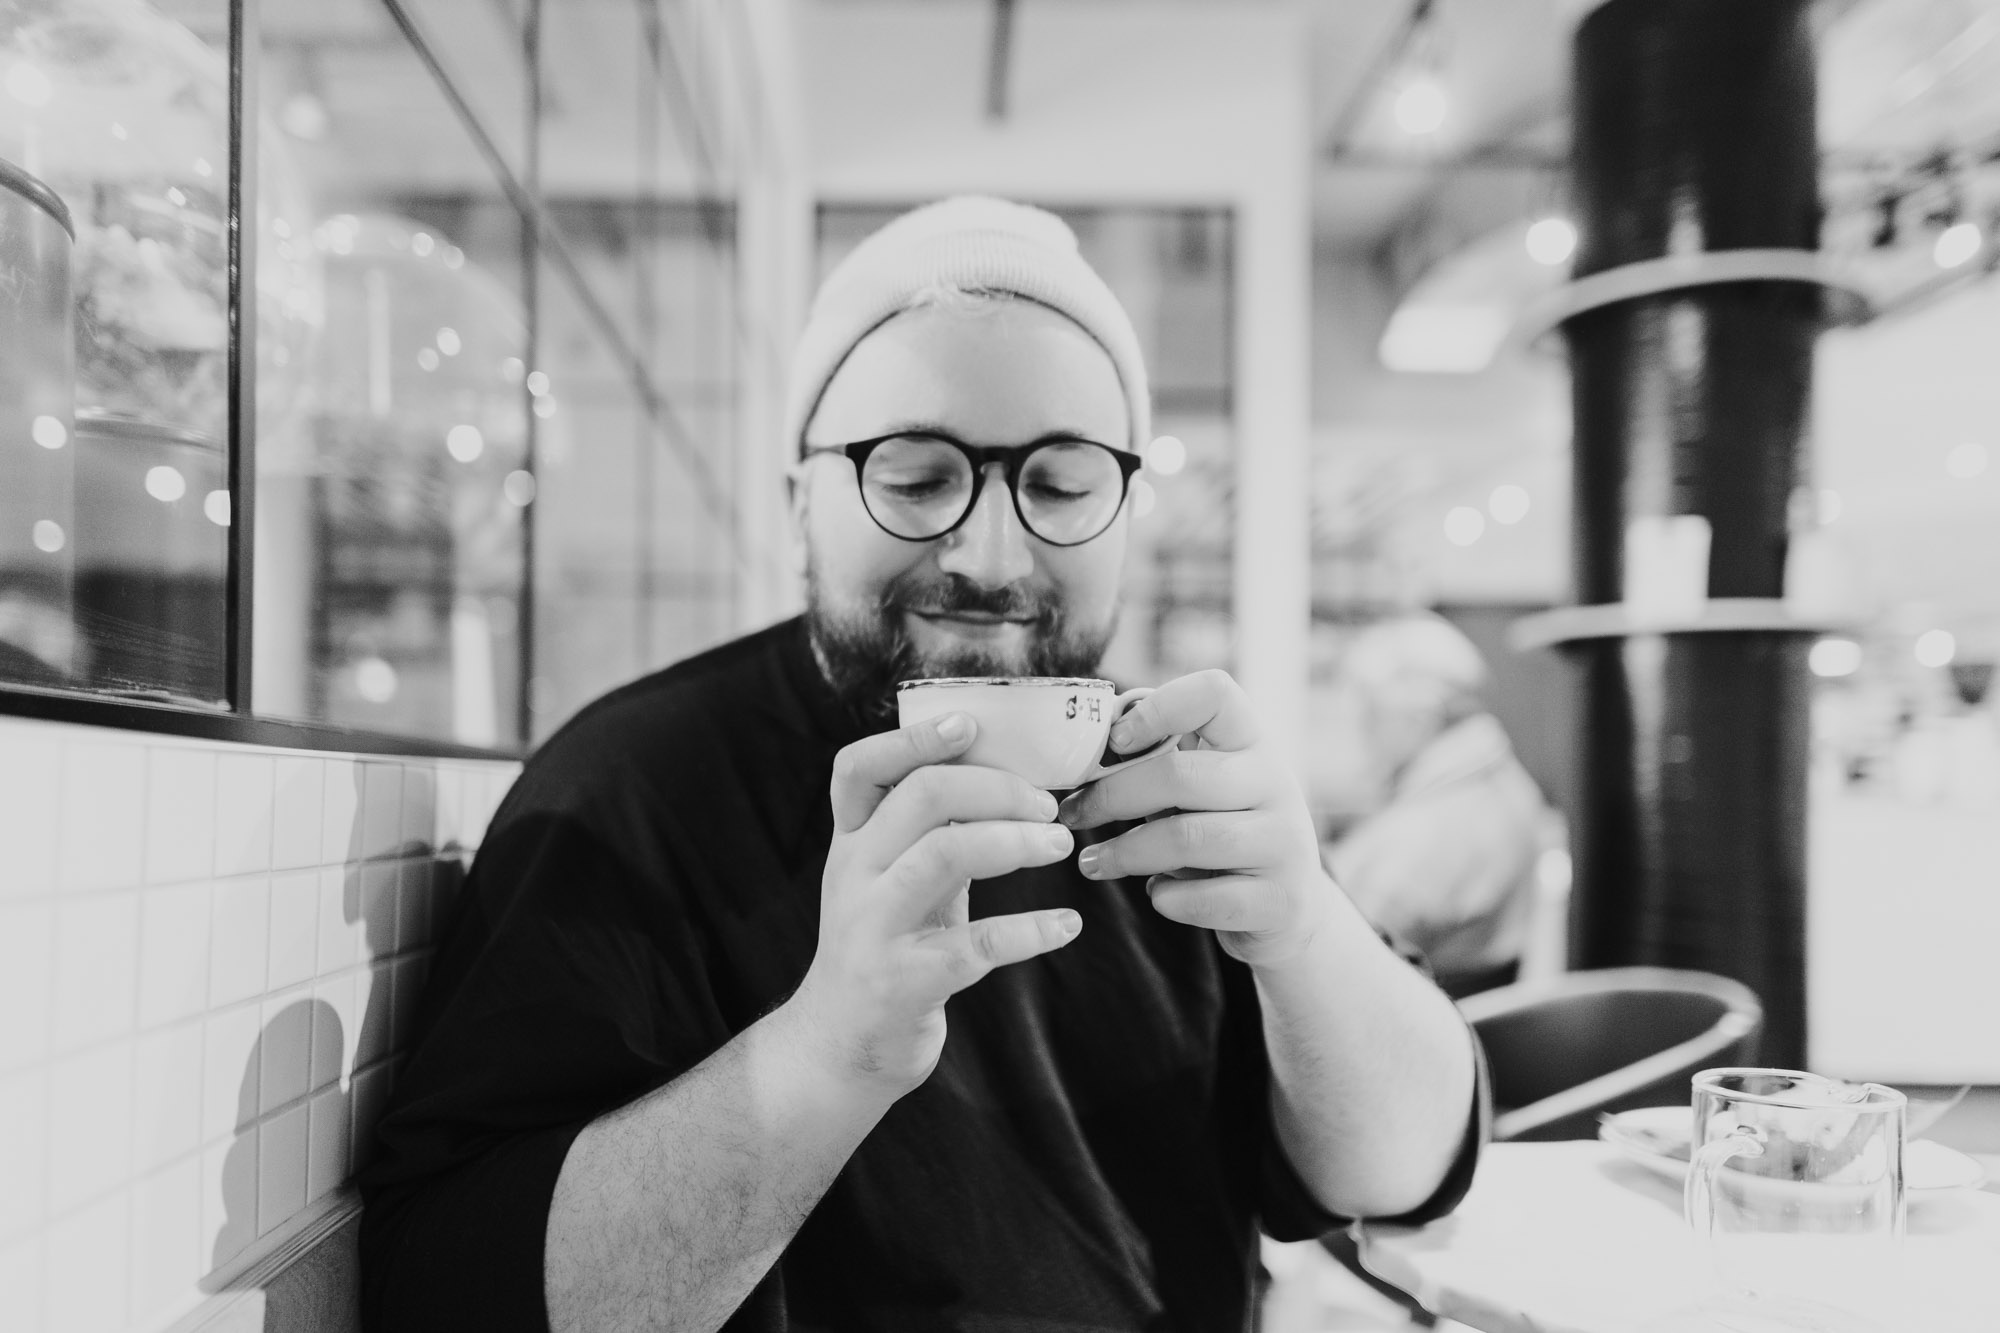 Drinking The Most Expensive Cup Of Coffee In Montreal at Saint-Henri microtorréfacteur - Jeff On The Road - All photos are under Copyright © 2018 Jeff Frenette Photography / dezjeff. To use the photos, please contact me at dezjeff@me.com.